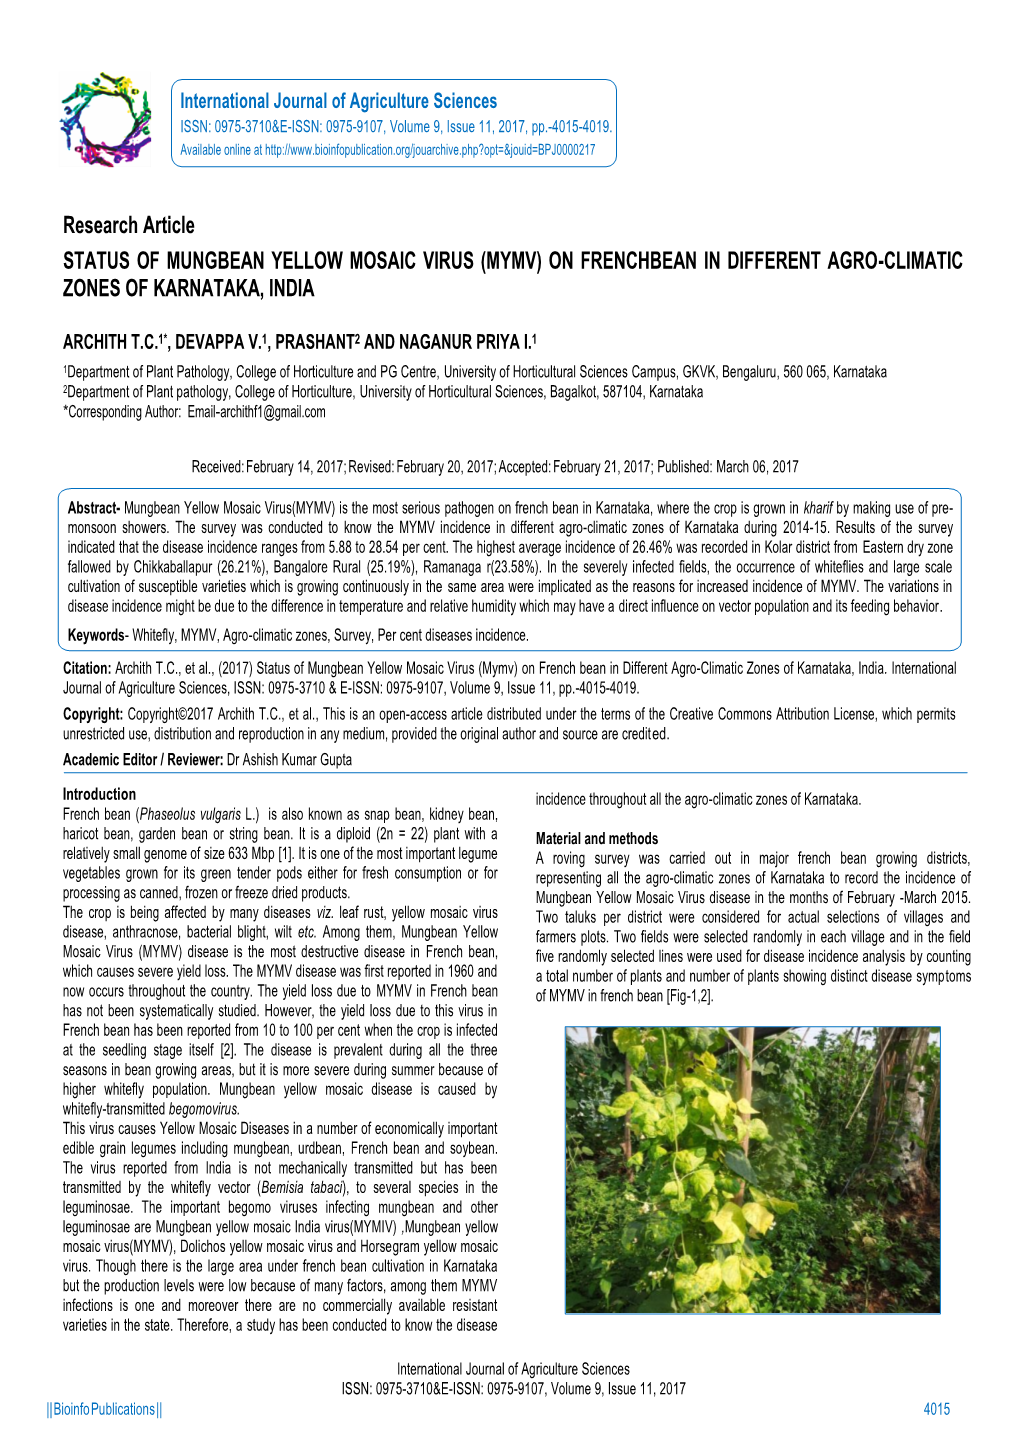 Research Article STATUS of MUNGBEAN YELLOW MOSAIC VIRUS (MYMV) on FRENCHBEAN in DIFFERENT AGRO-CLIMATIC ZONES of KARNATAKA, INDIA